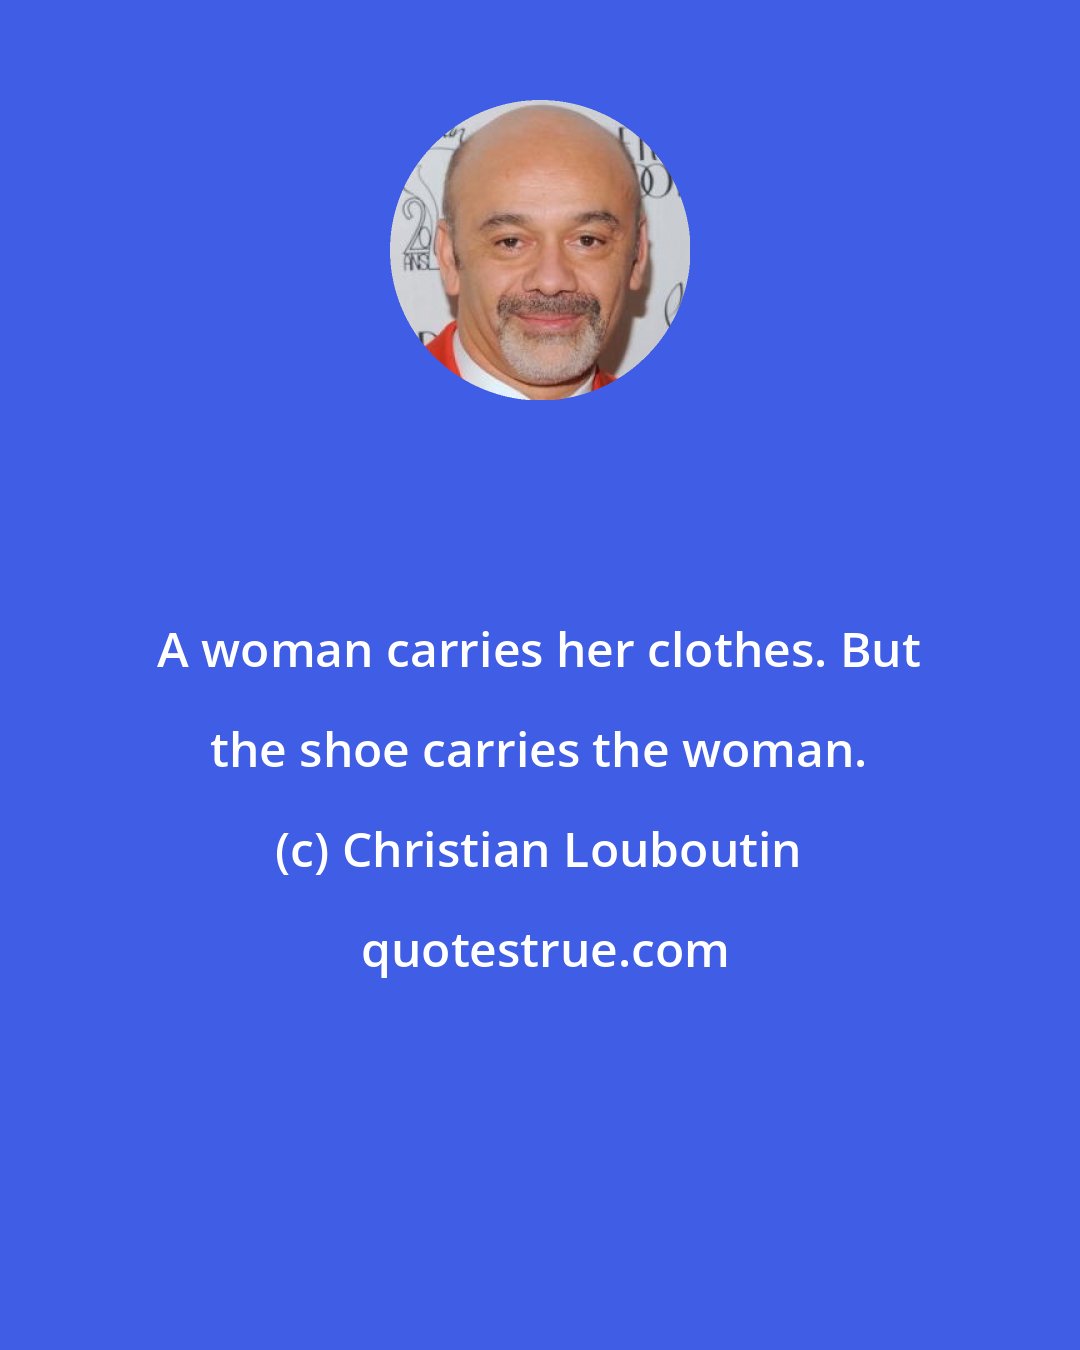 Christian Louboutin: A woman carries her clothes. But the shoe carries the woman.